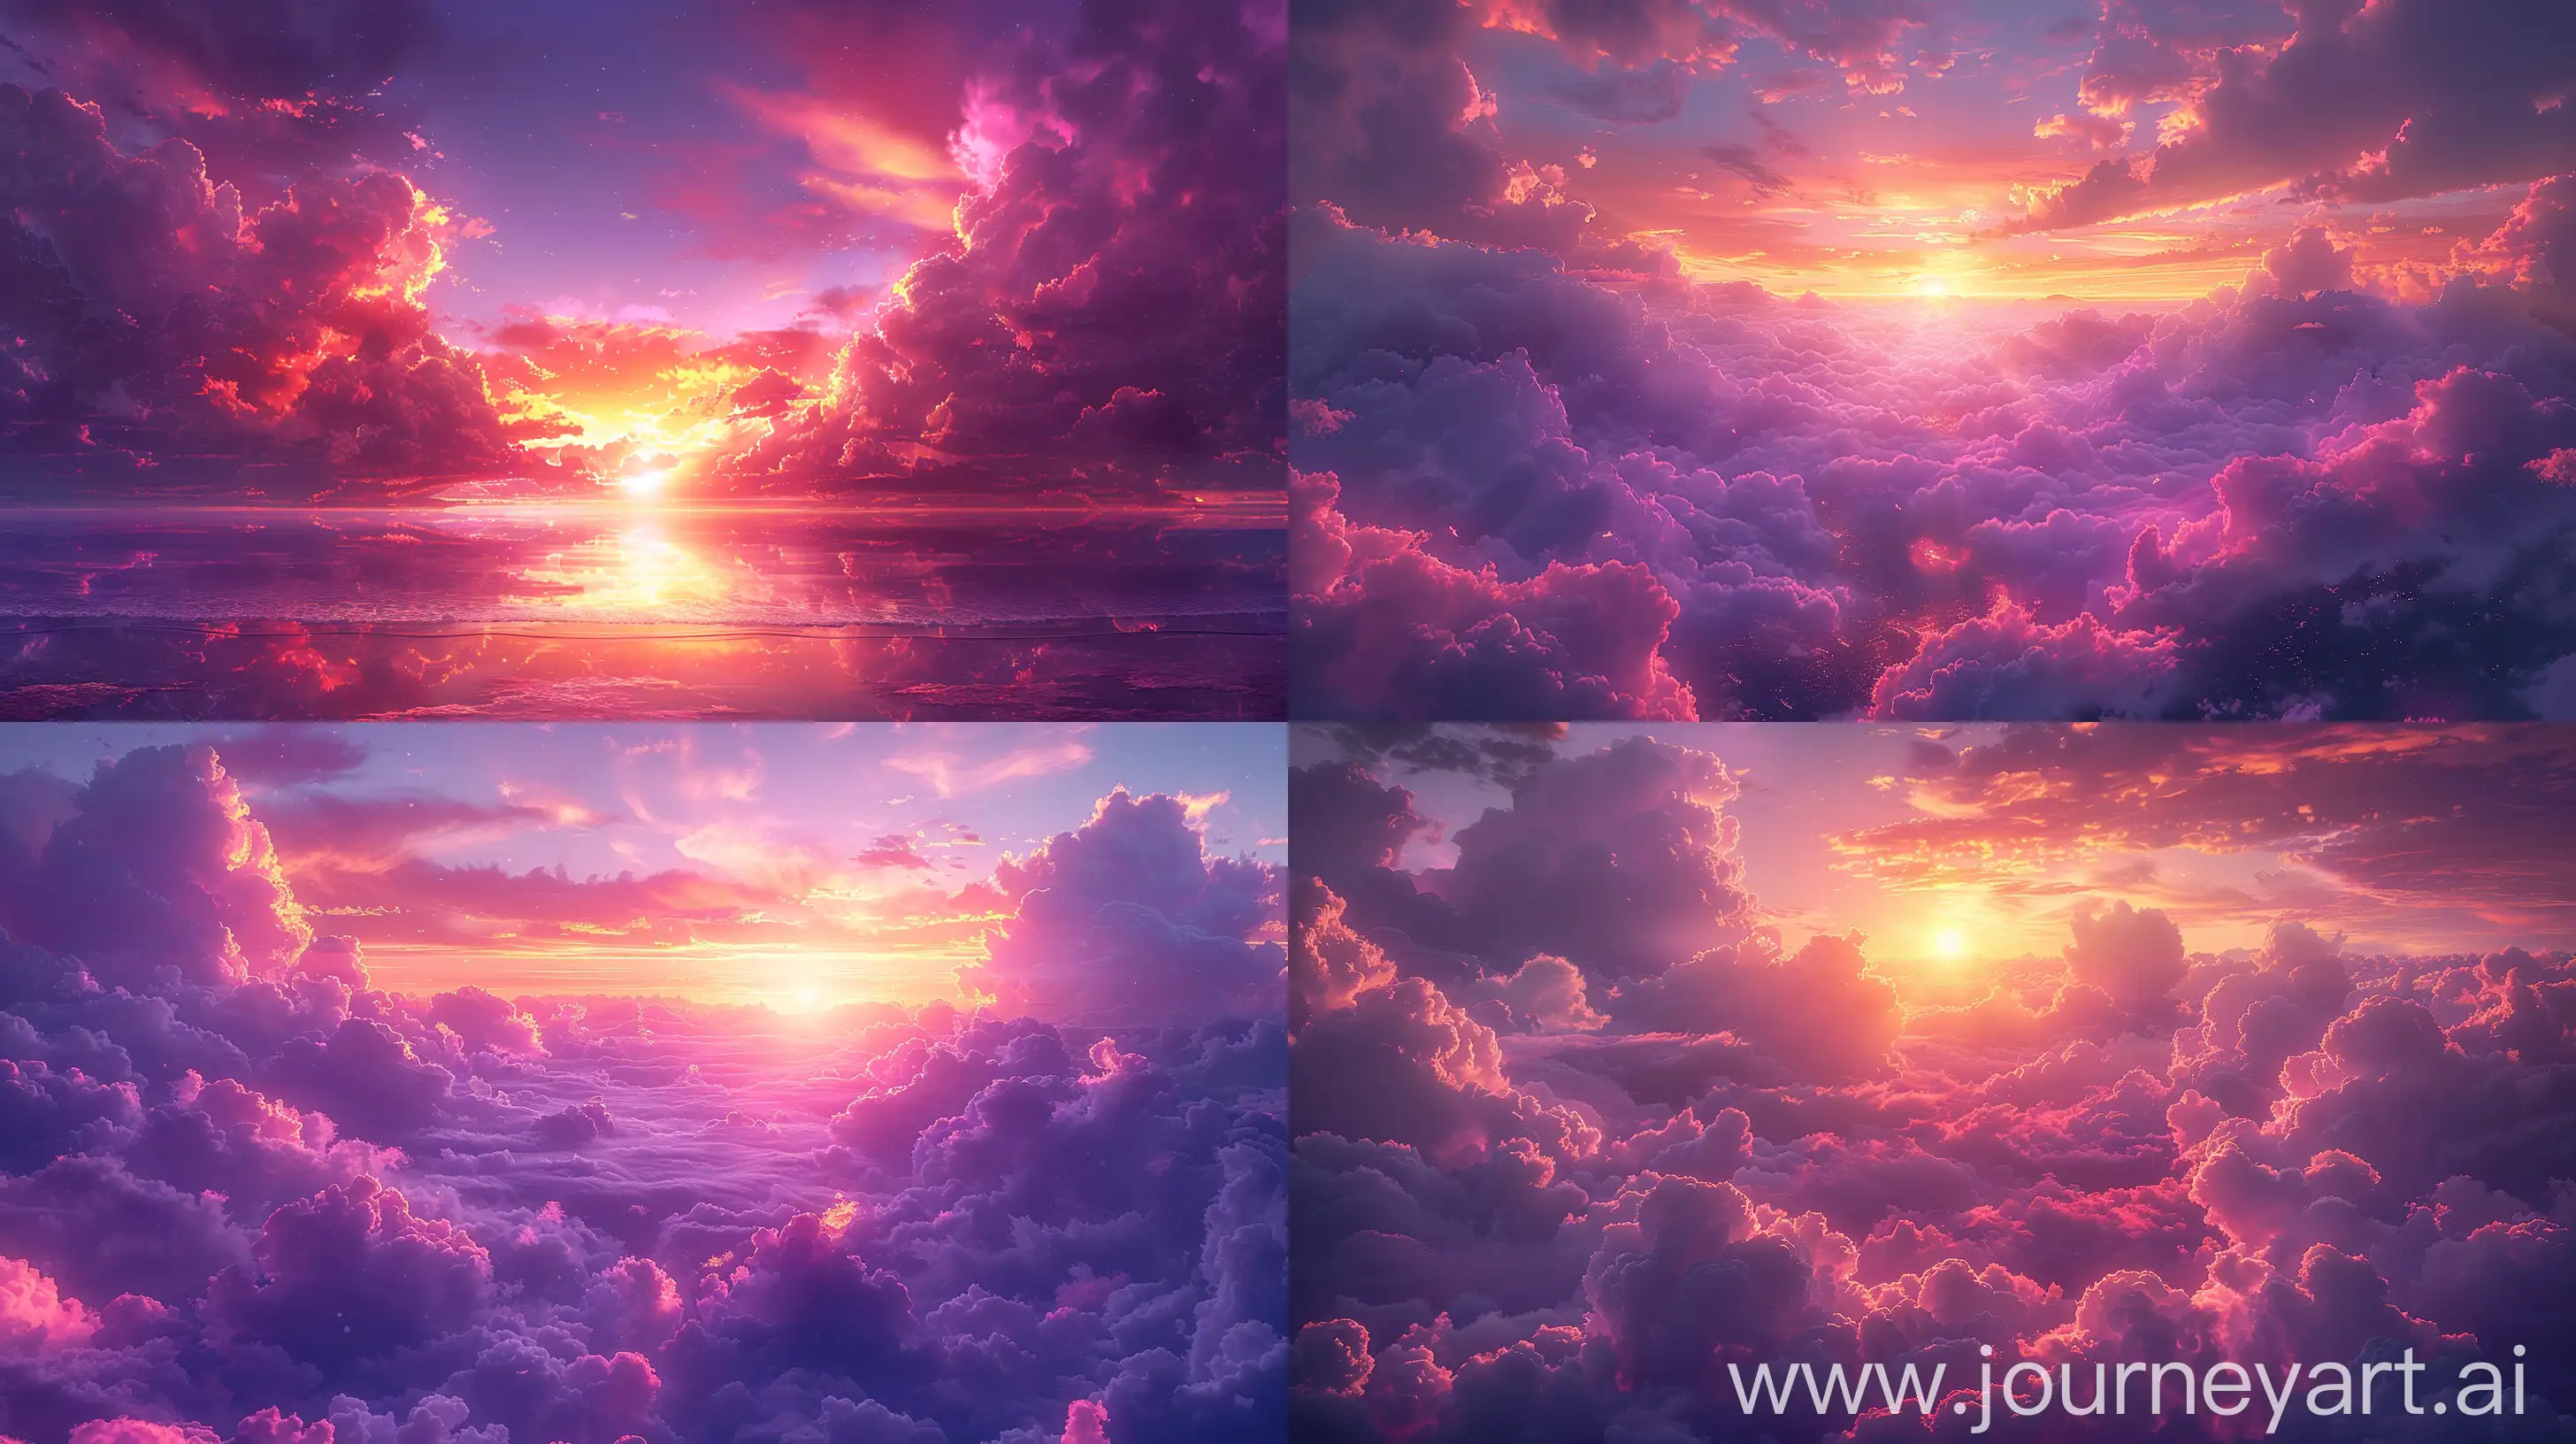 Vivid-AnimeStyle-Sunset-Landscape-with-Multicolored-Clouds